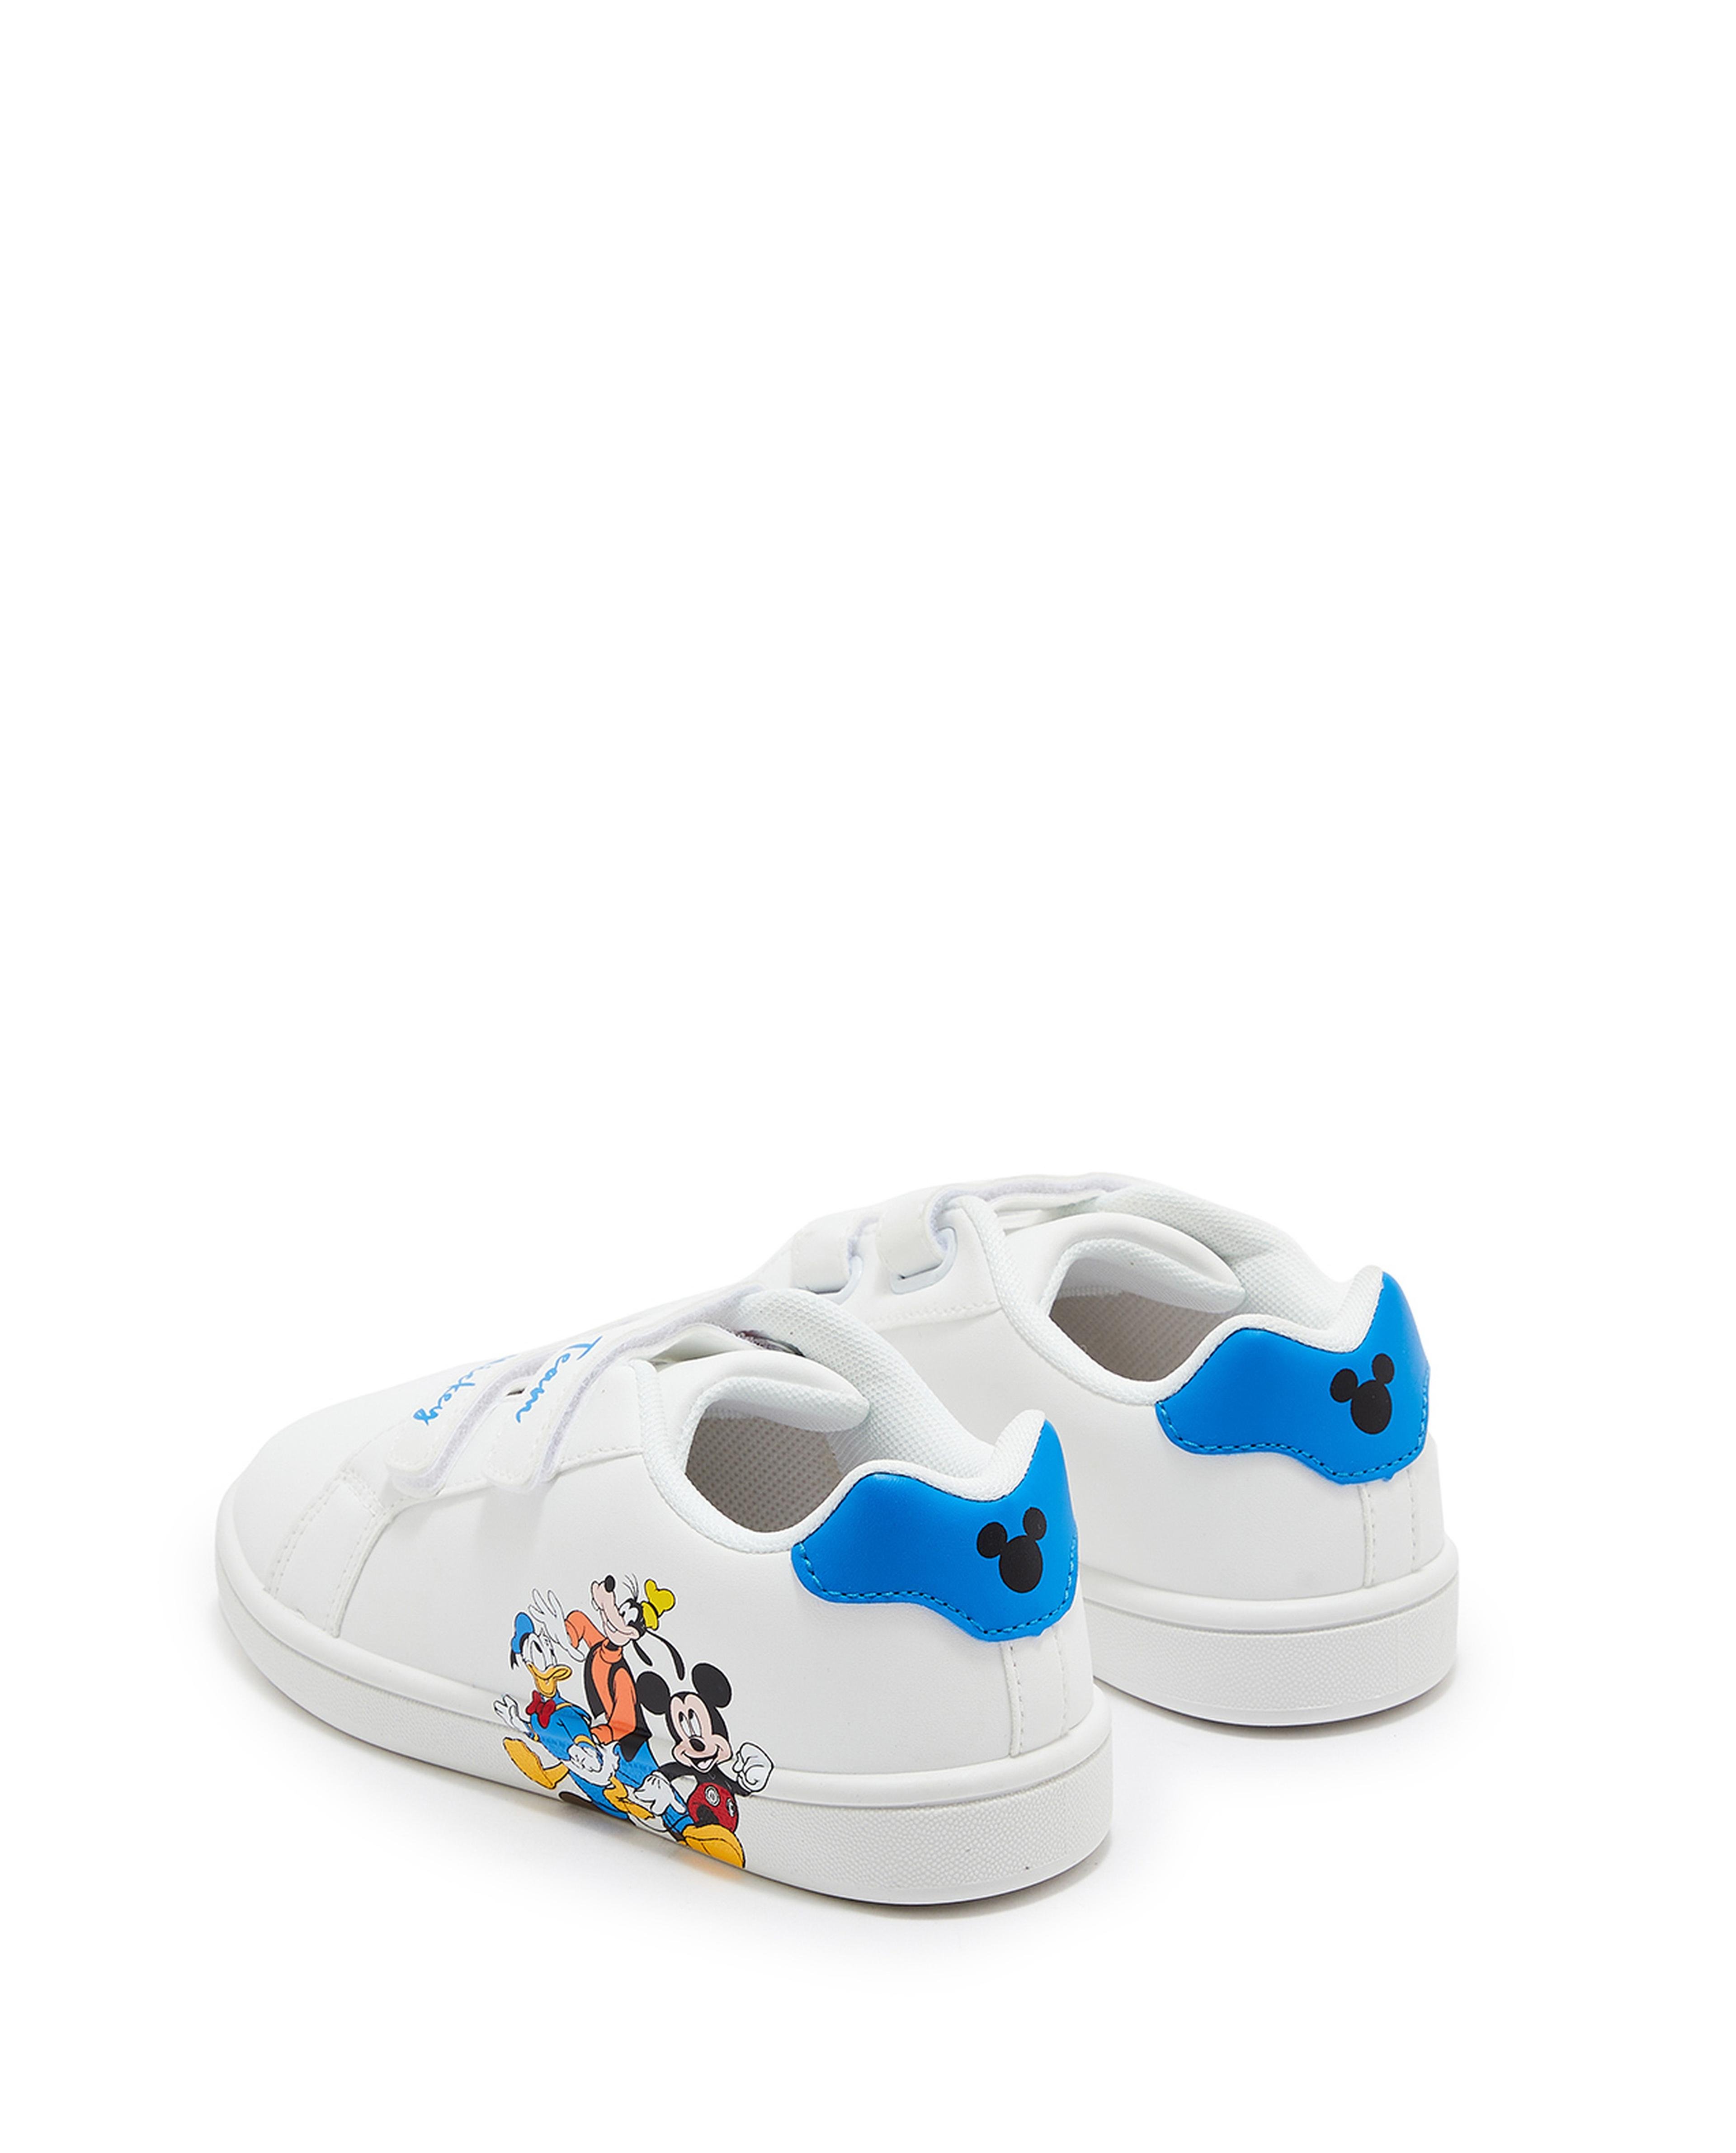 Mickey & Friends Print Velcro Shoes